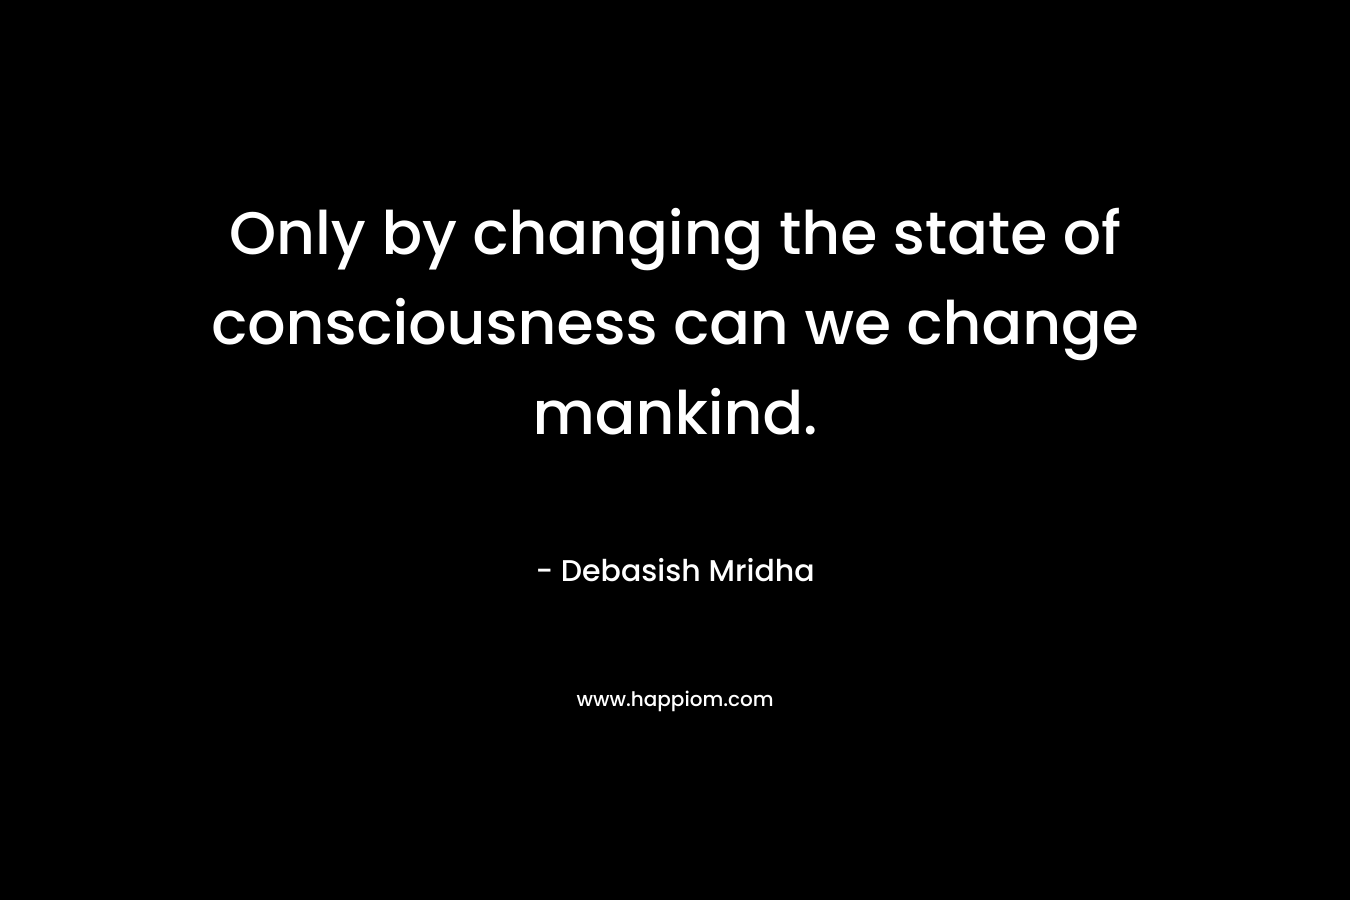 Only by changing the state of consciousness can we change mankind.